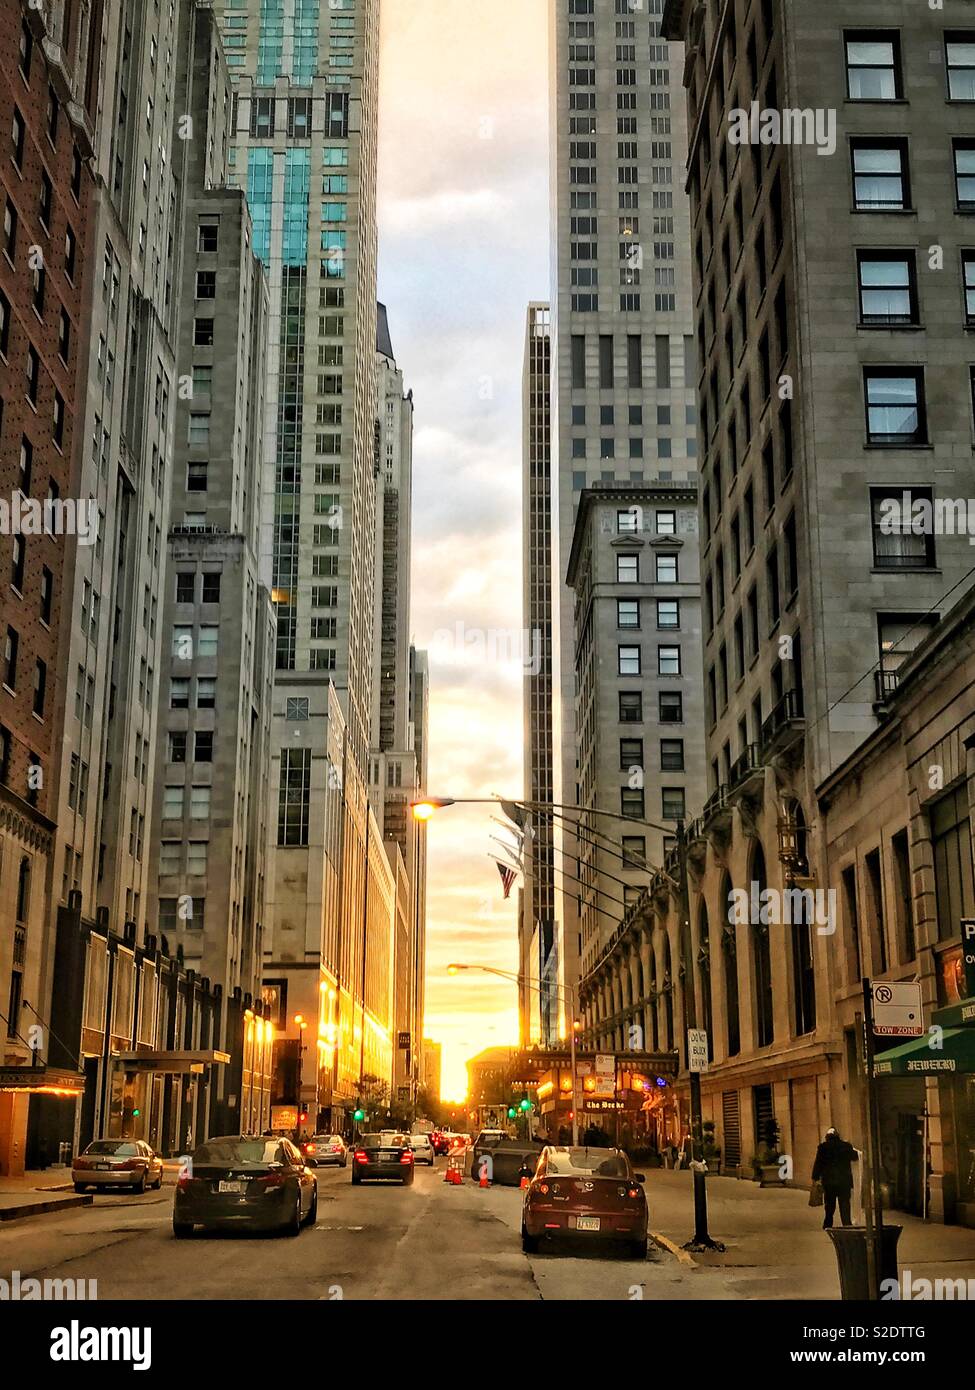 A Chicago street at sunset. Stock Photo